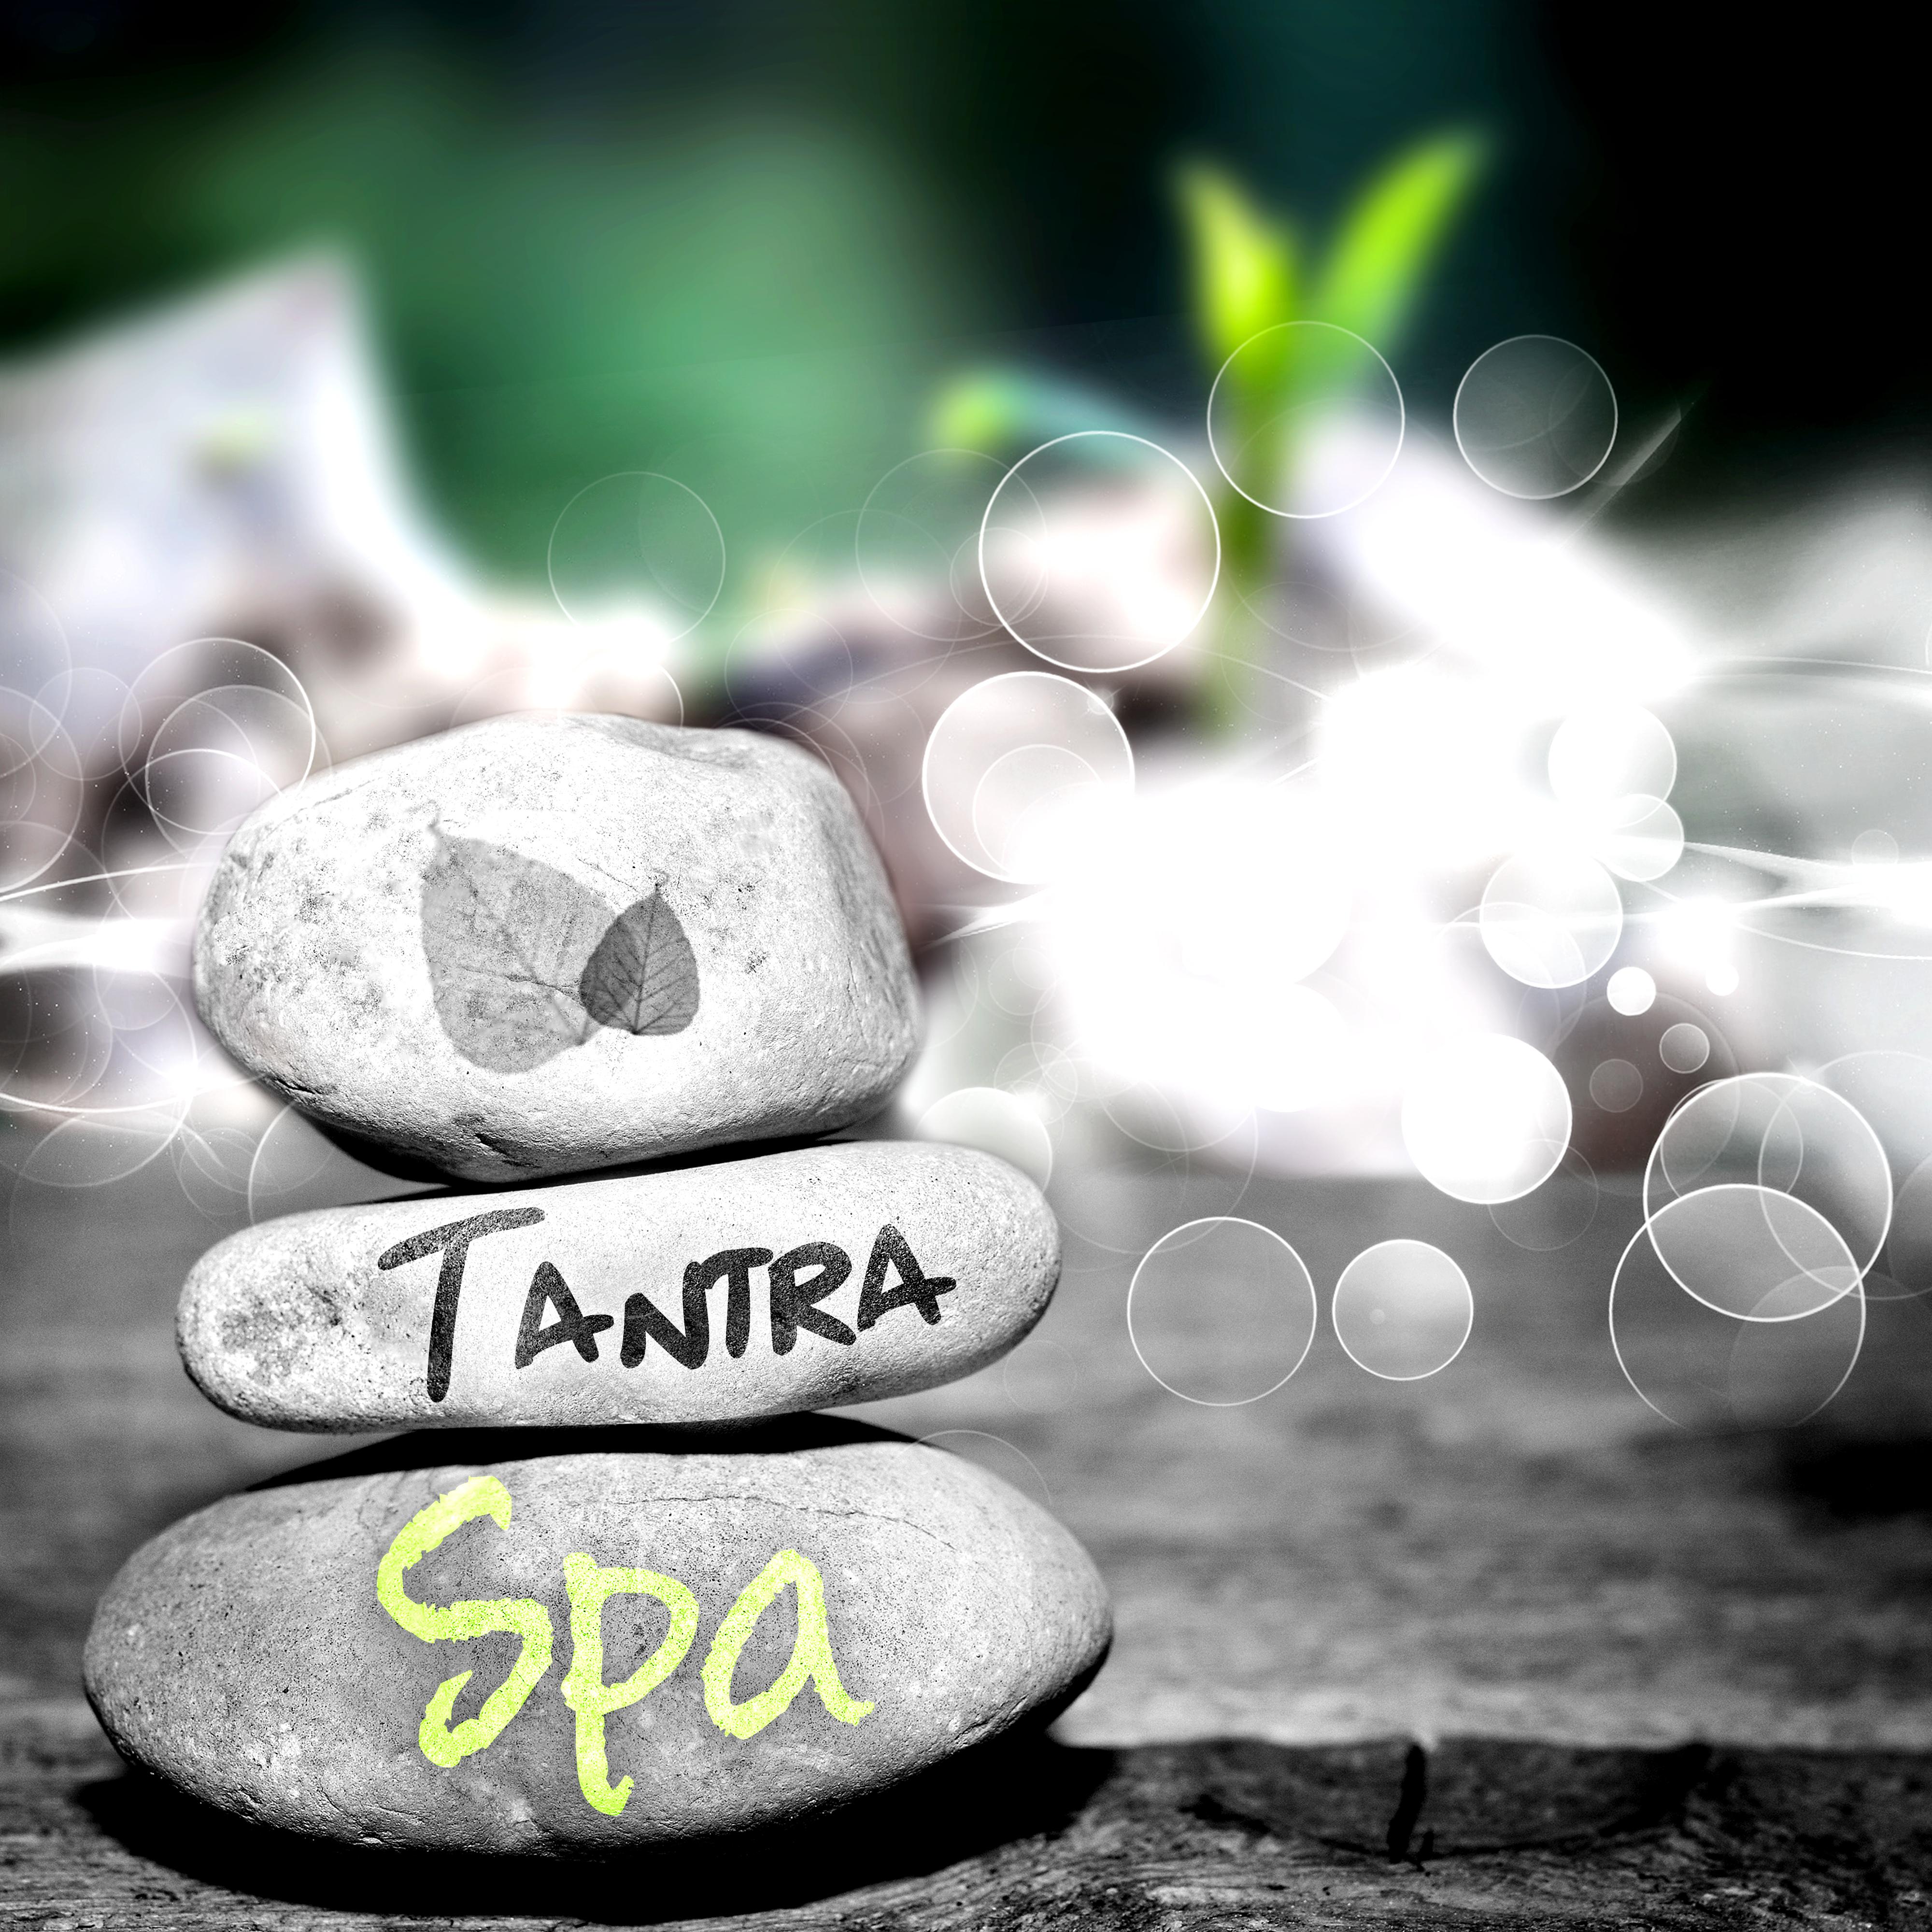 Tantra Spa – Erotic Lounge Massage, Sensual Chill Out Music for Making Love, Kamasutra & Tantric Spa Music